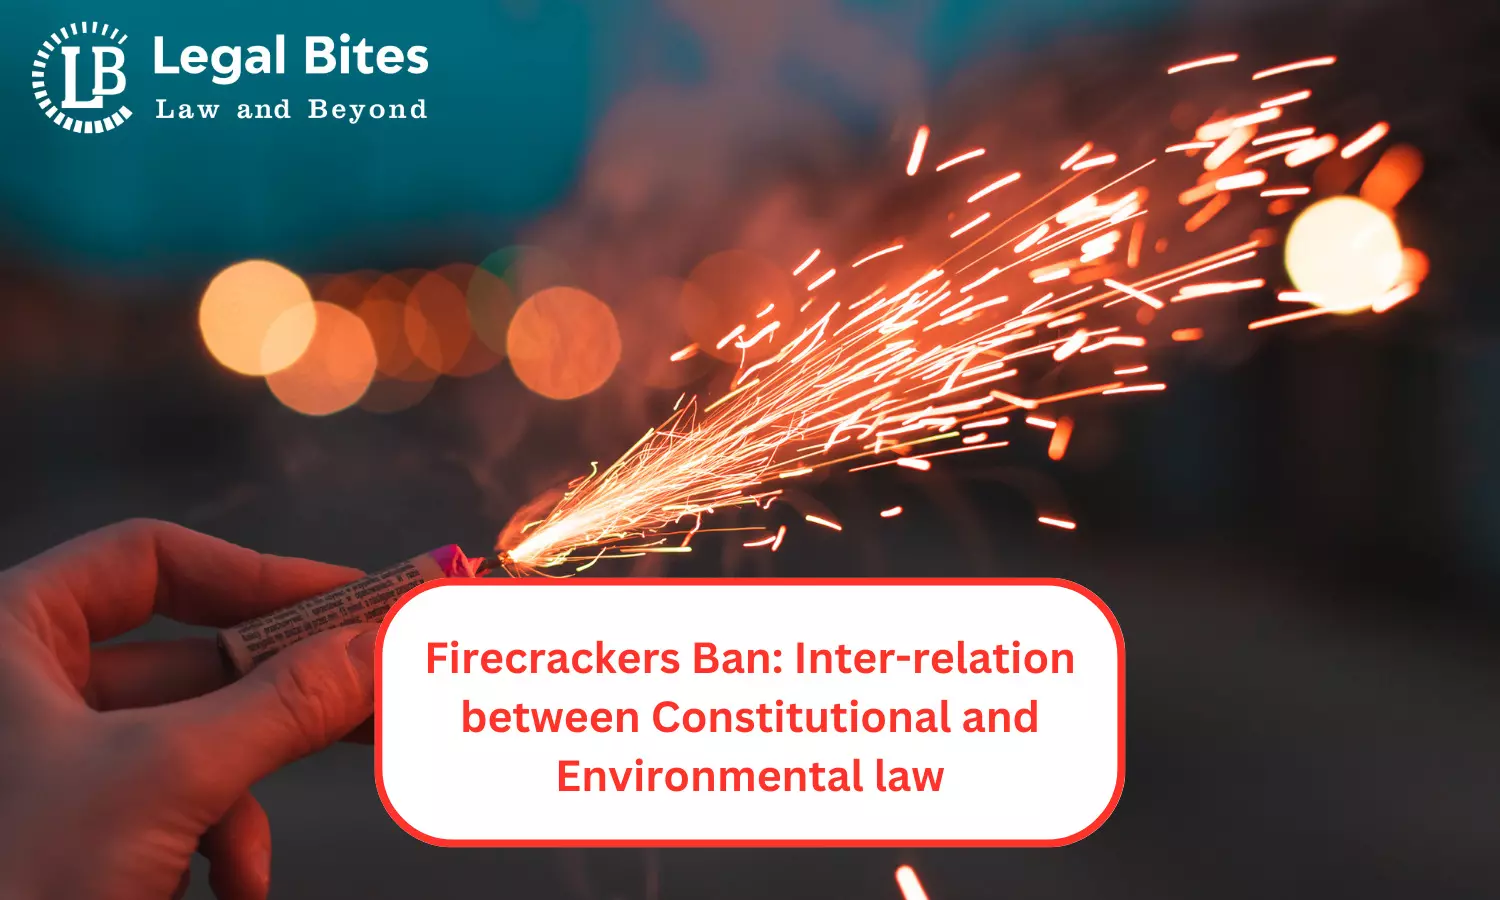 Firecrackers Ban: Inter-relation between Constitutional and Environmental Law